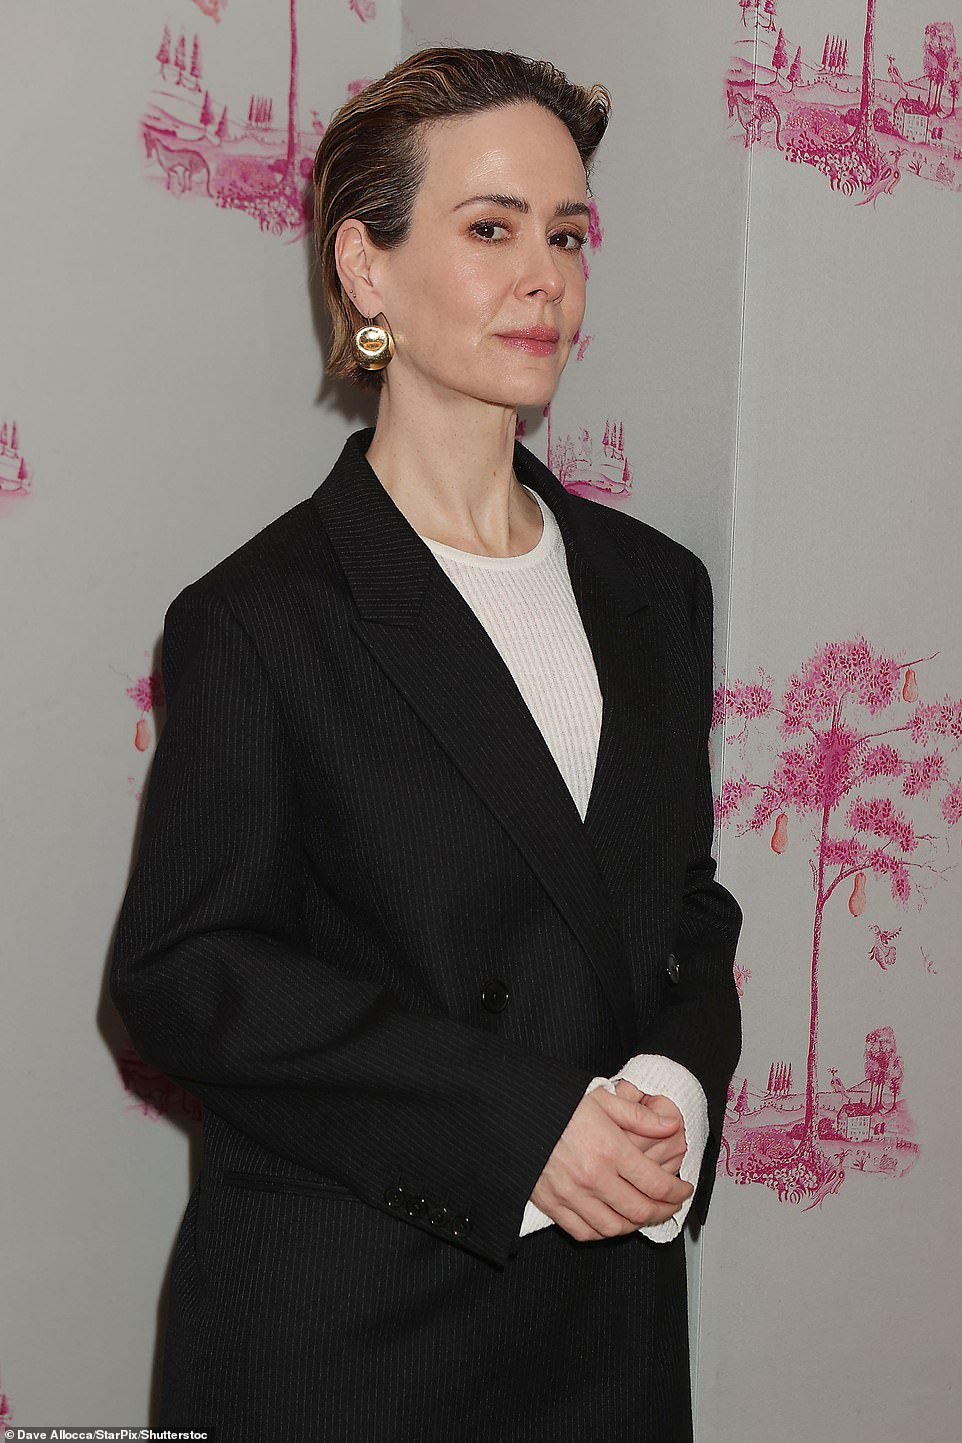 Paulson wore large gold earrings, a black pantsuit over a ribbed white top and black kitten heels selected by stylist Karla Welch